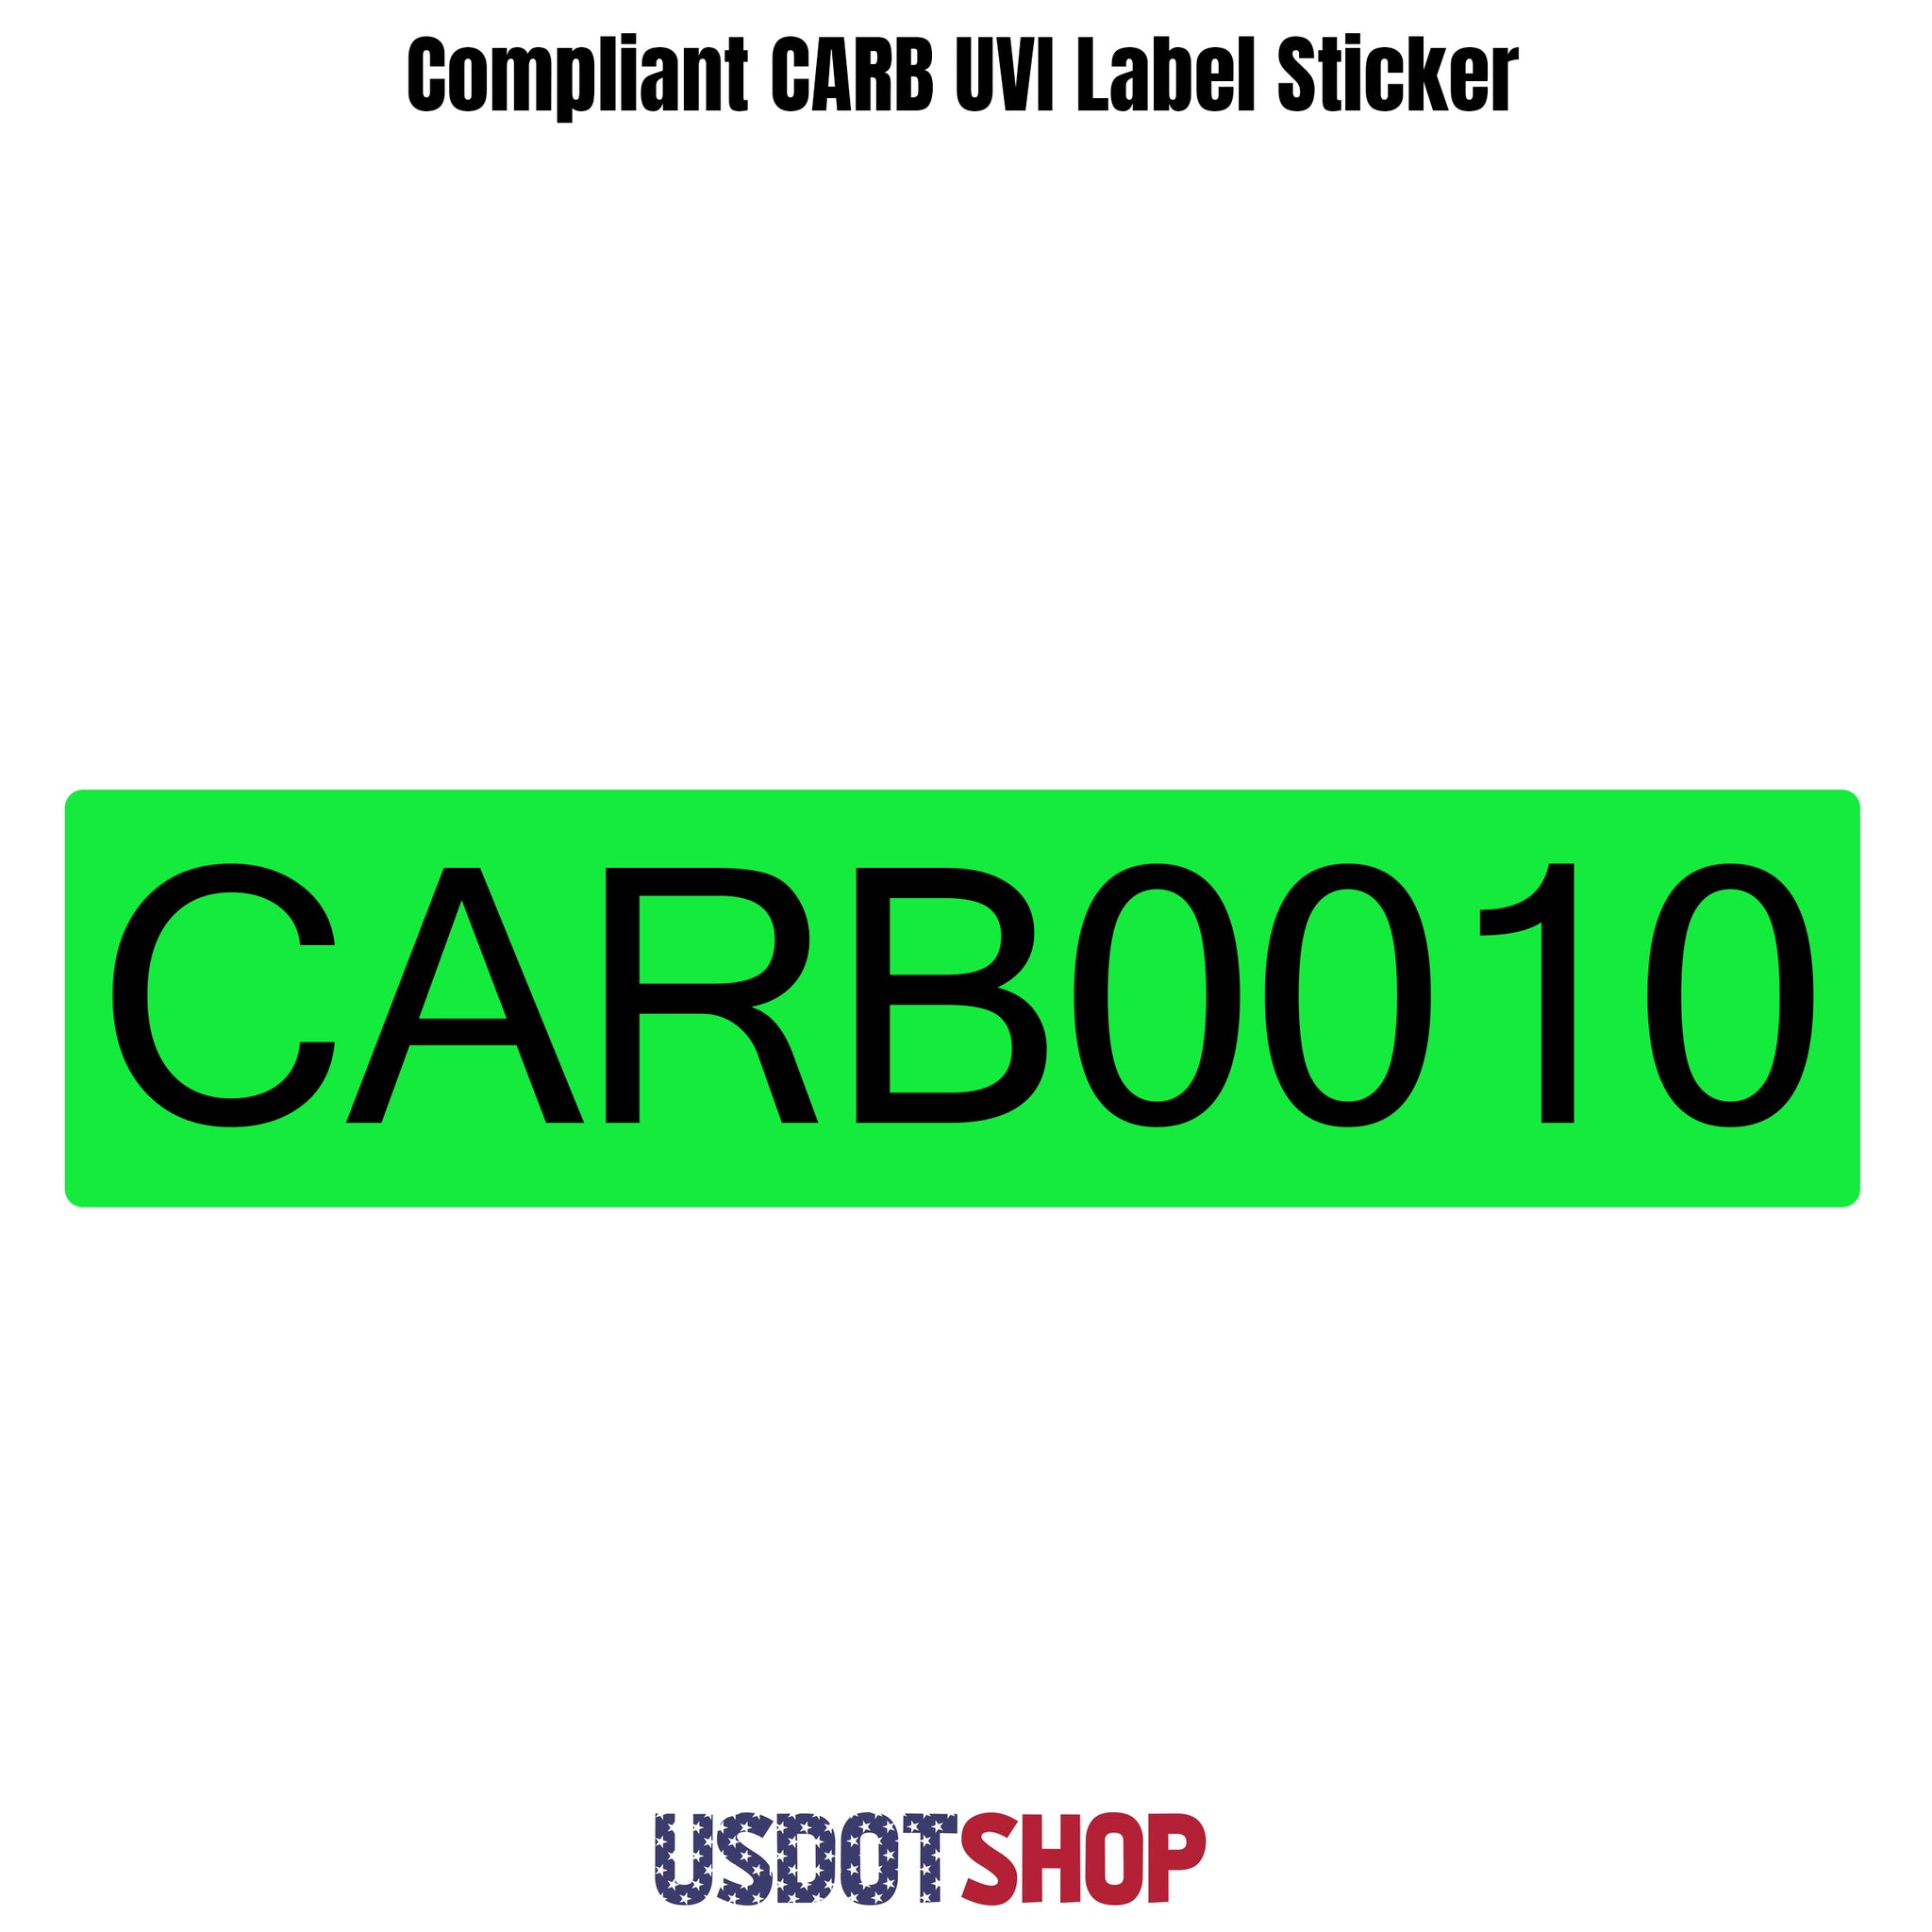 carb uvi label decal sticker for vessels 